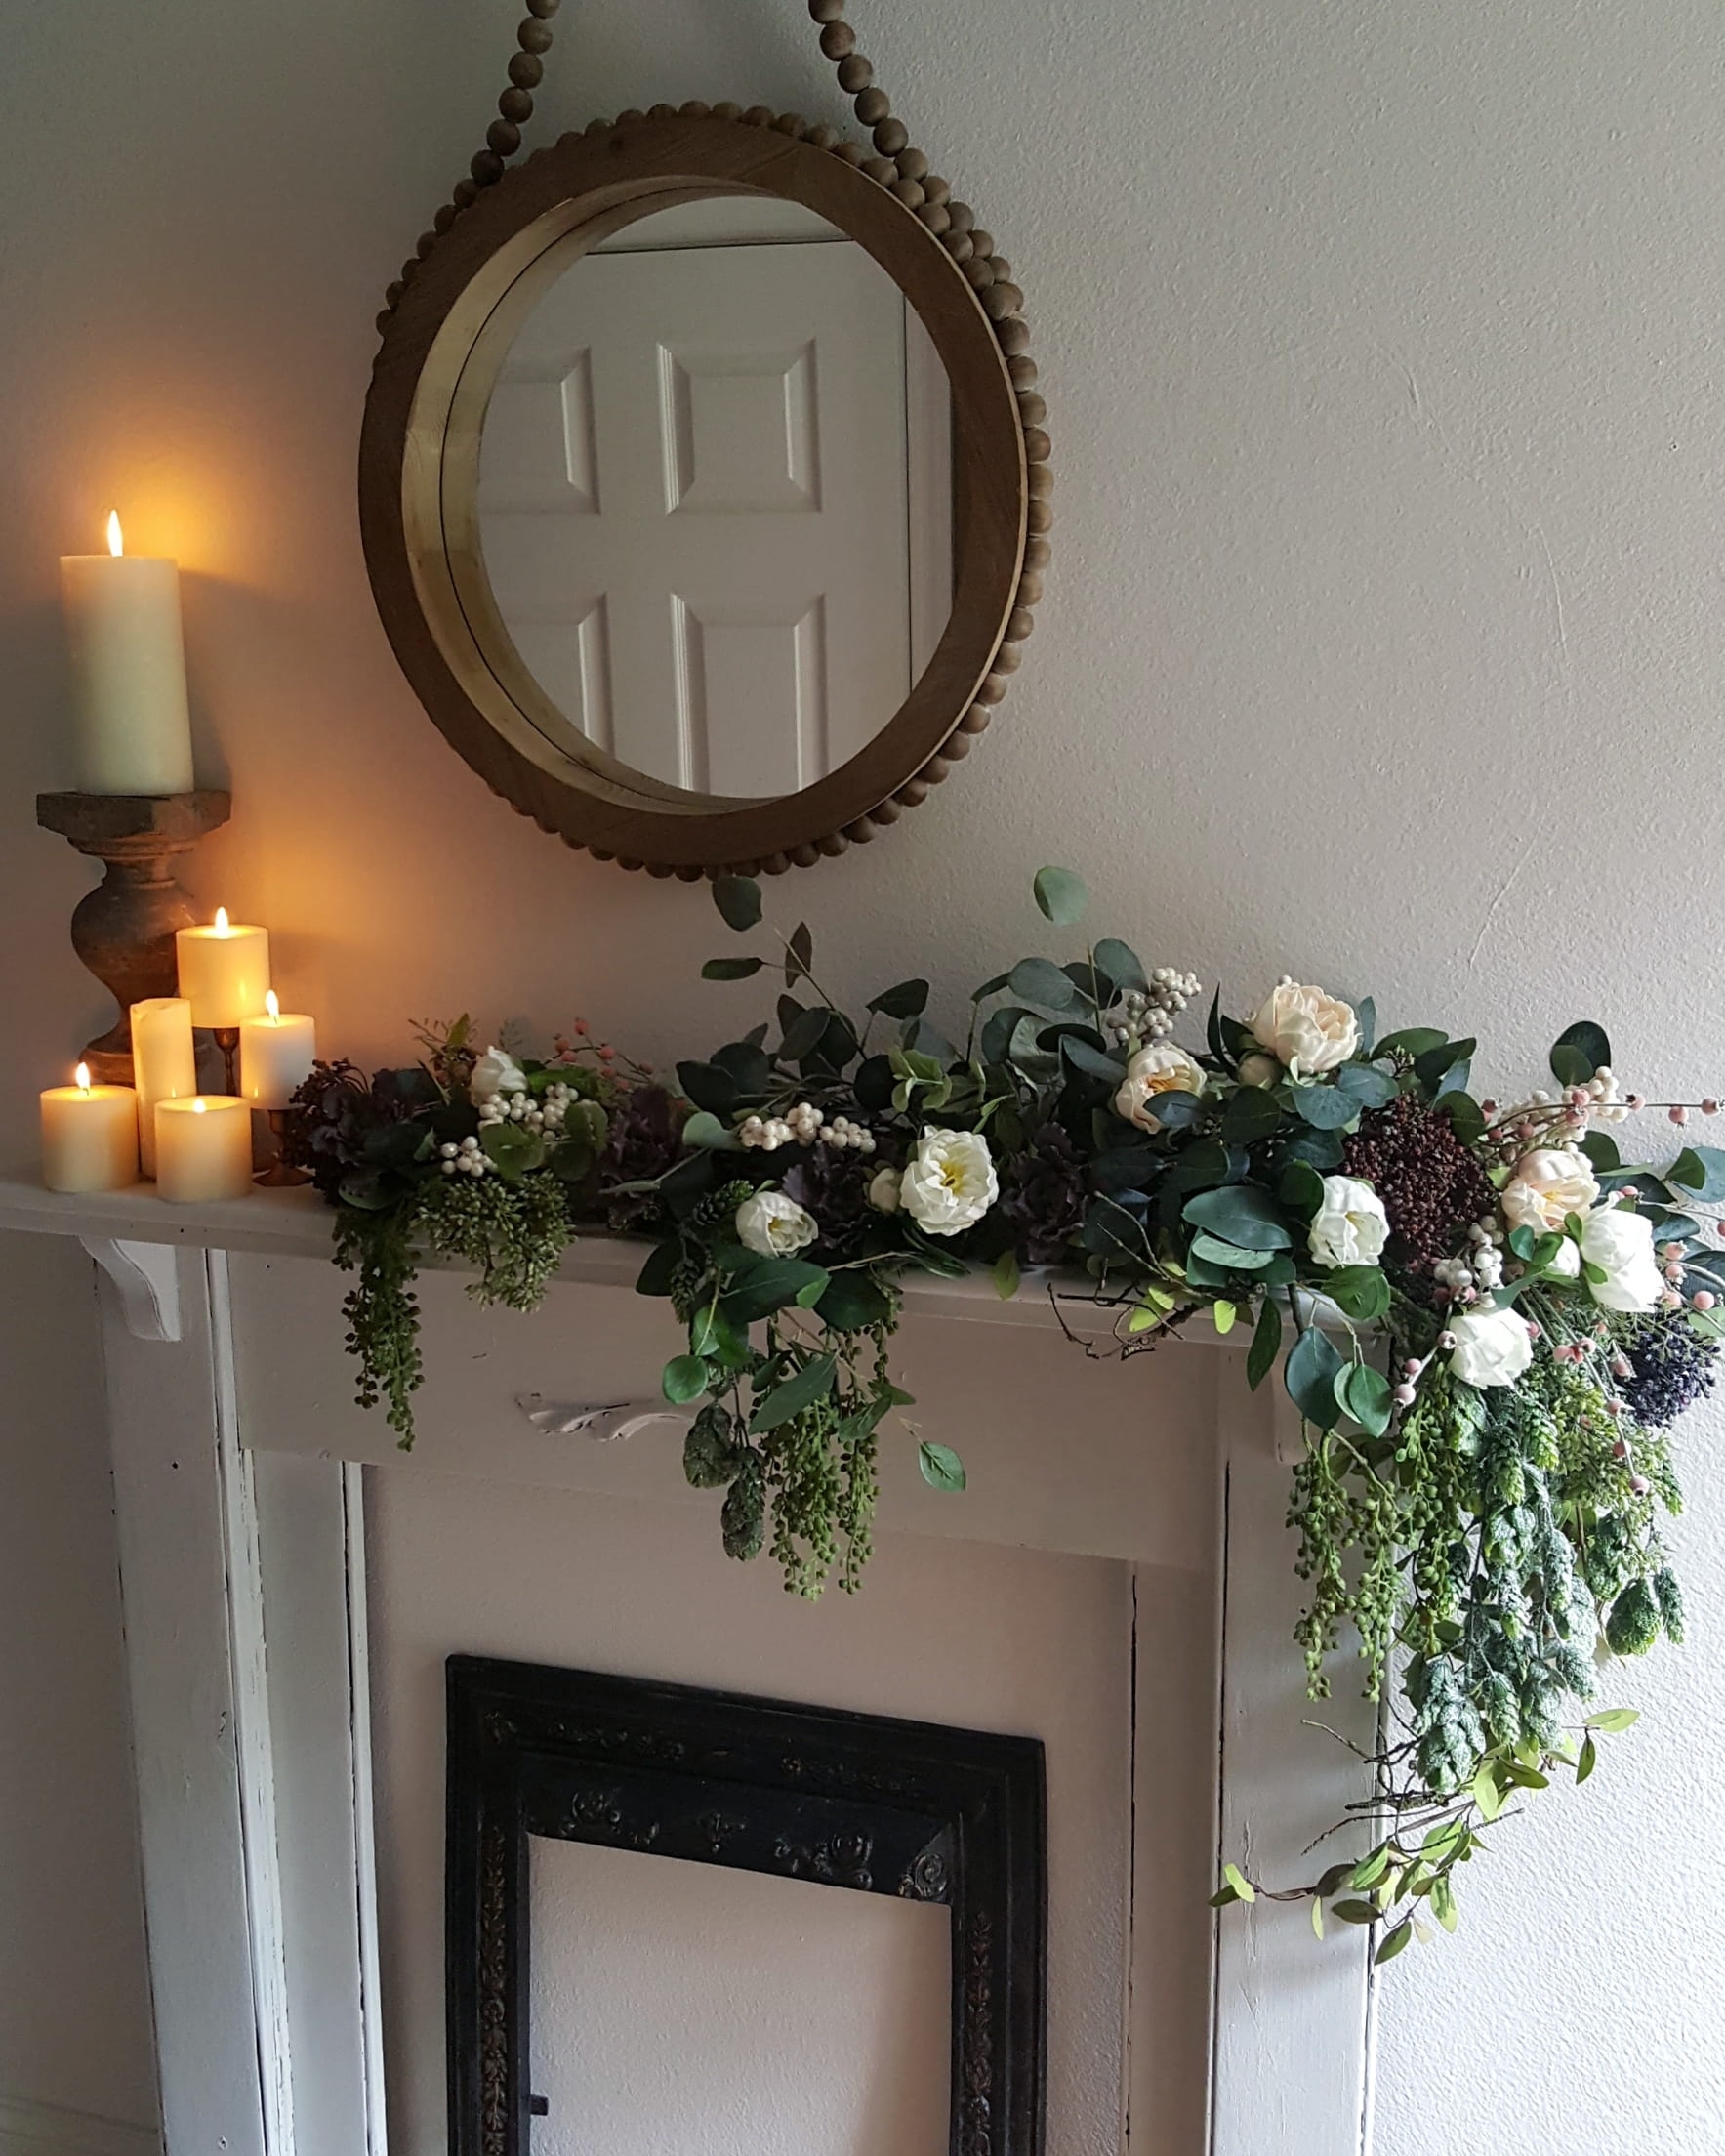 Decorate Mantel Fall Winter Faux Flowers White Neutral Design Candles Vintage Fireplace Decorate Ideas Wood Mirror Succulents Peonies Berry Branches Eucalyptus Afloral Antique Decor Inspiration